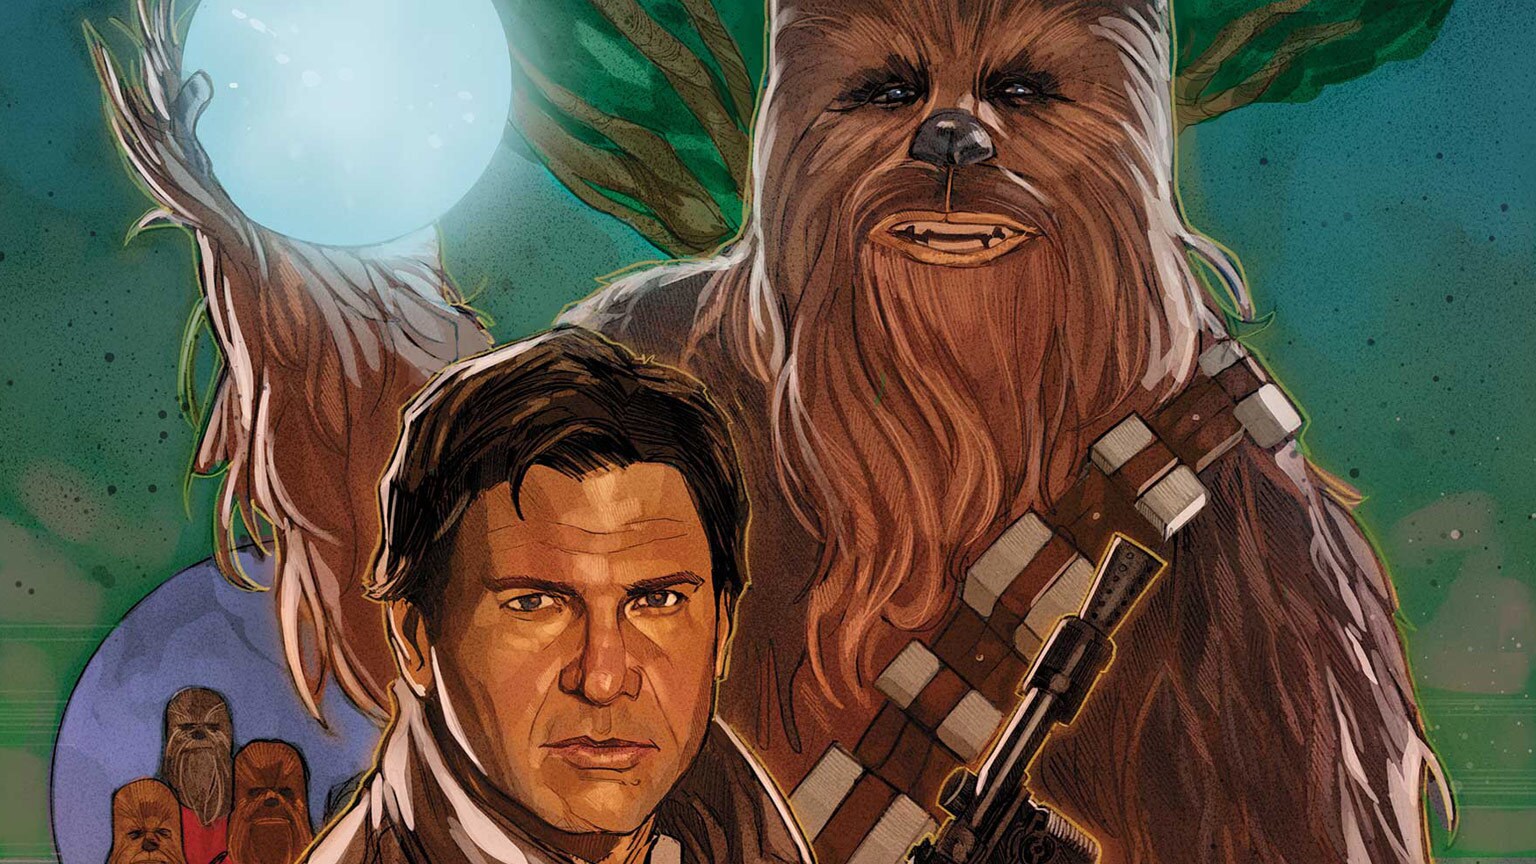 Marvel's One-Shot Star Wars: Life Day Celebrates with Four Festive Tales